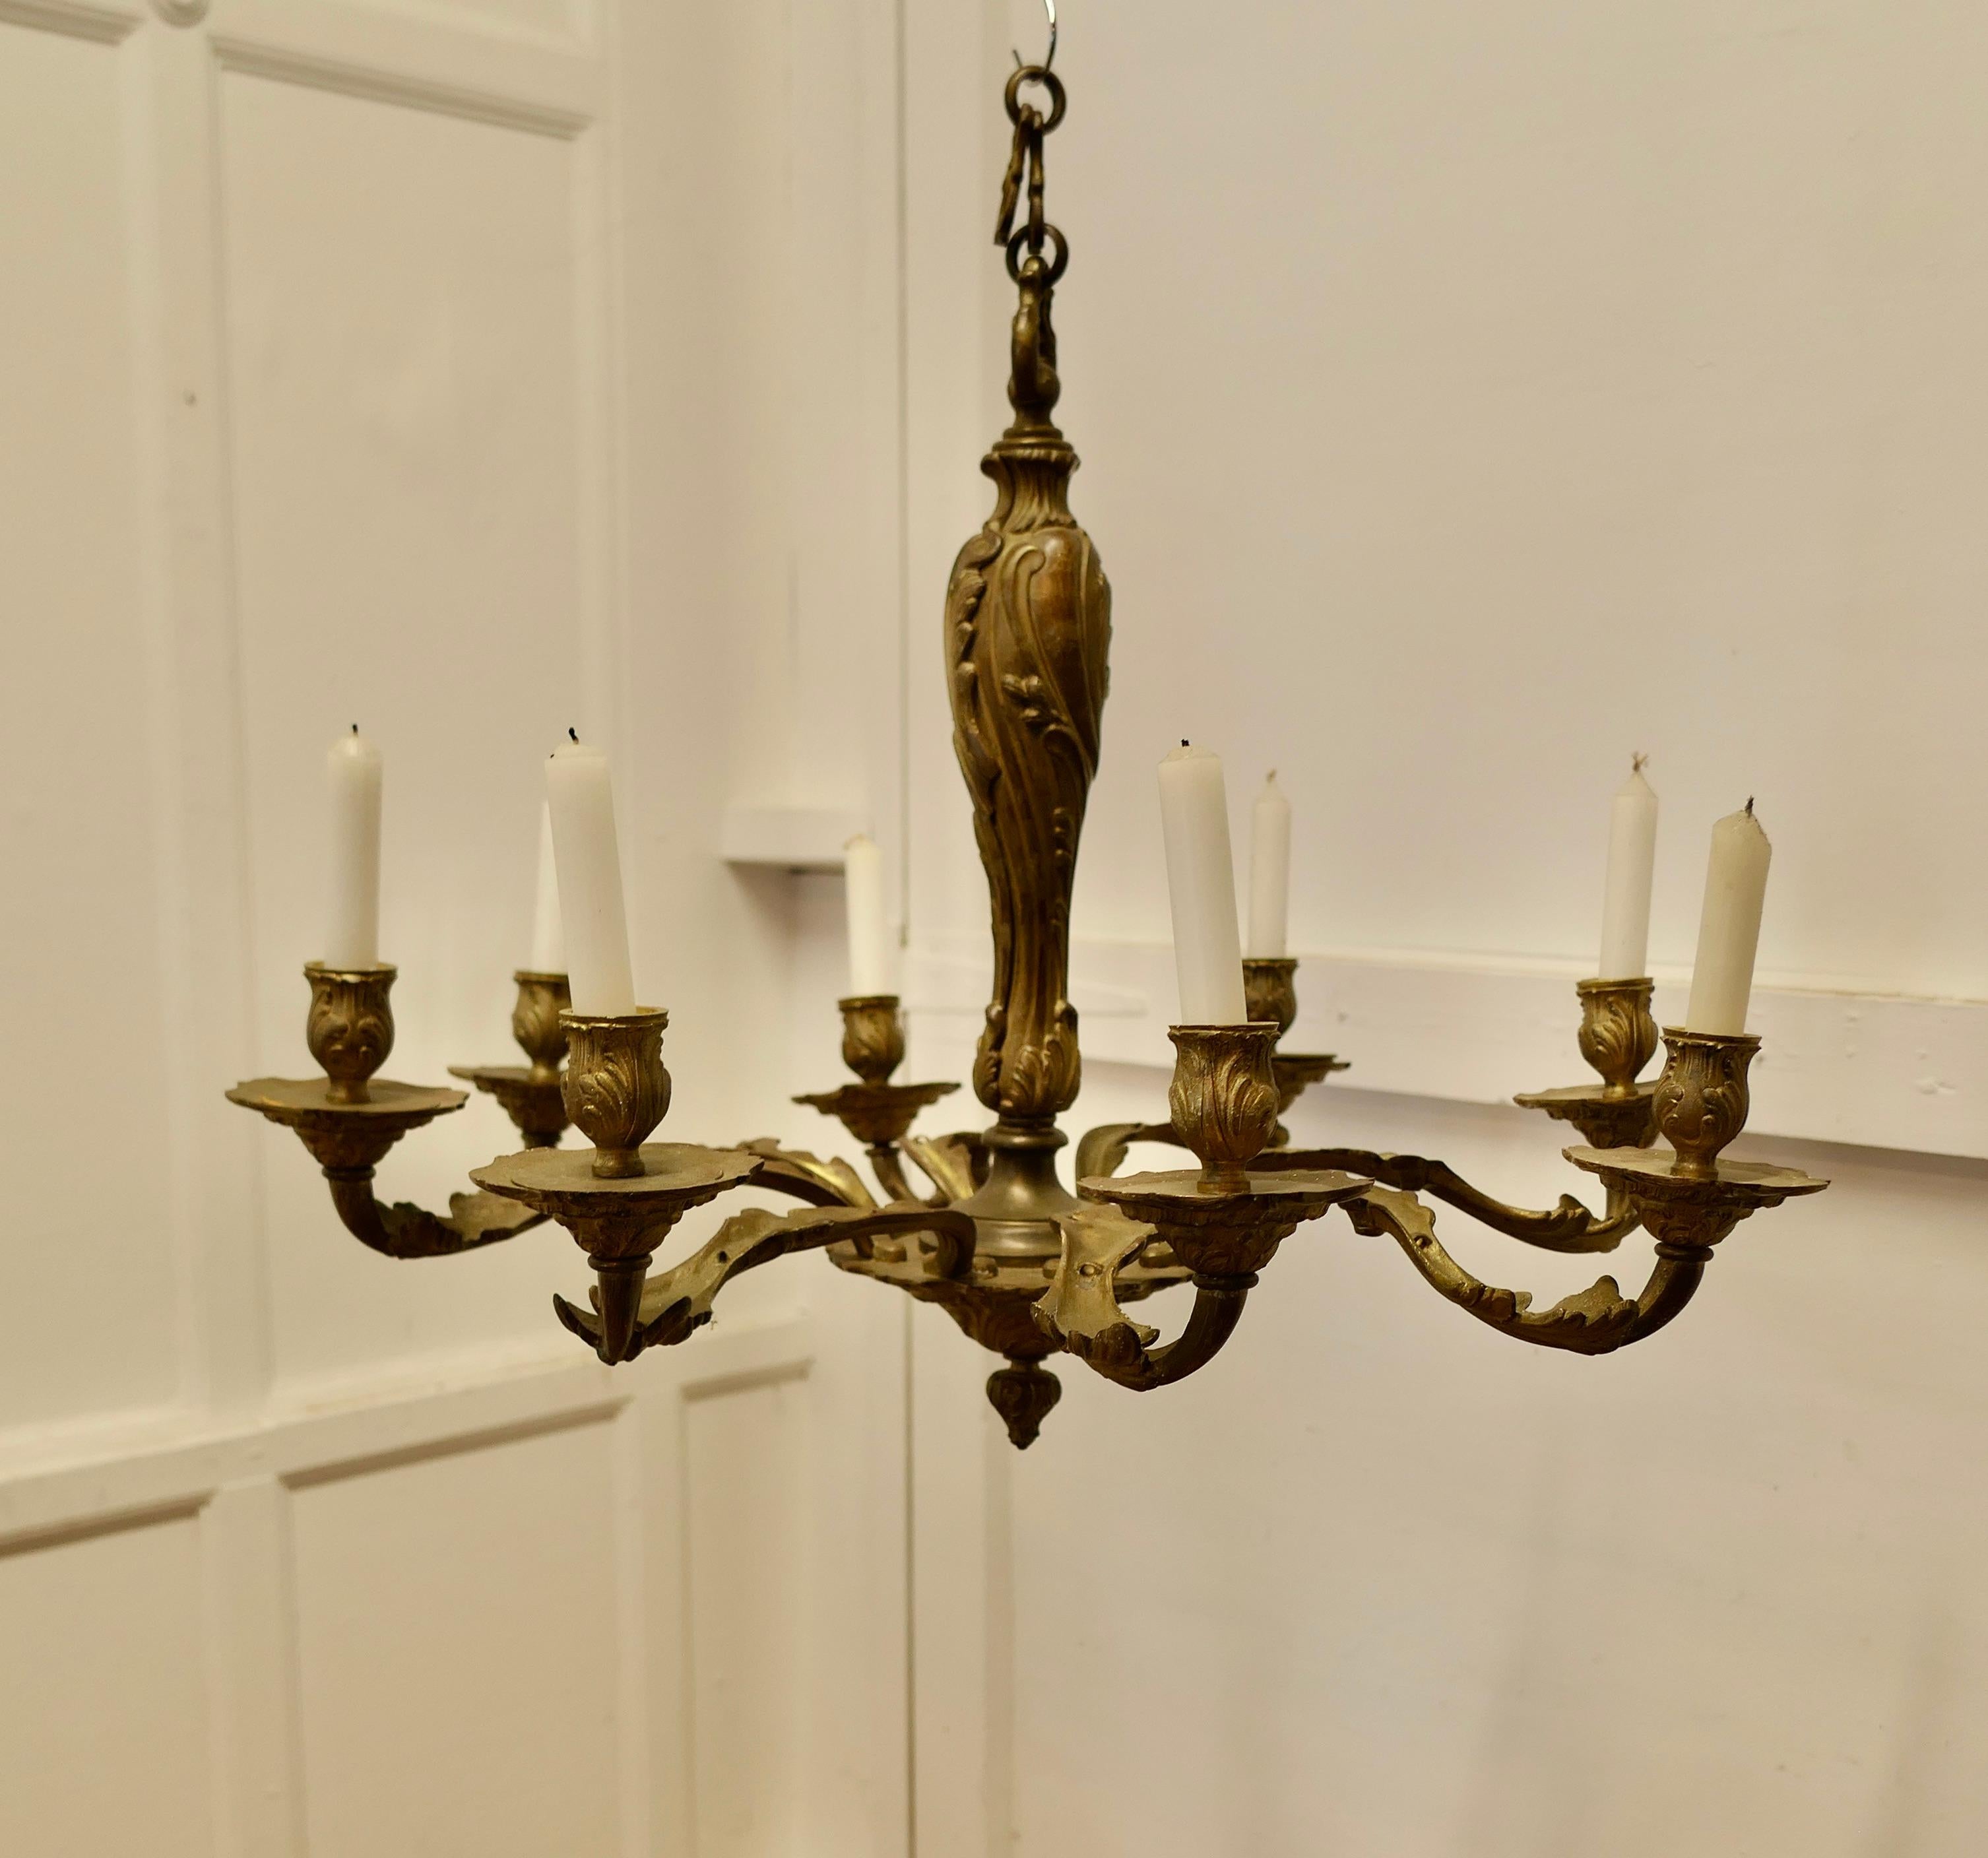 A French Gilded Brass 8 Branch Rococo Chandelier (Candelier)

This is an excellent quality and large piece it is very heavy and has a superb aged gilt finish
The Chandelier is decorated in the Rococo way with entwined Acanthus leaves 
So now with